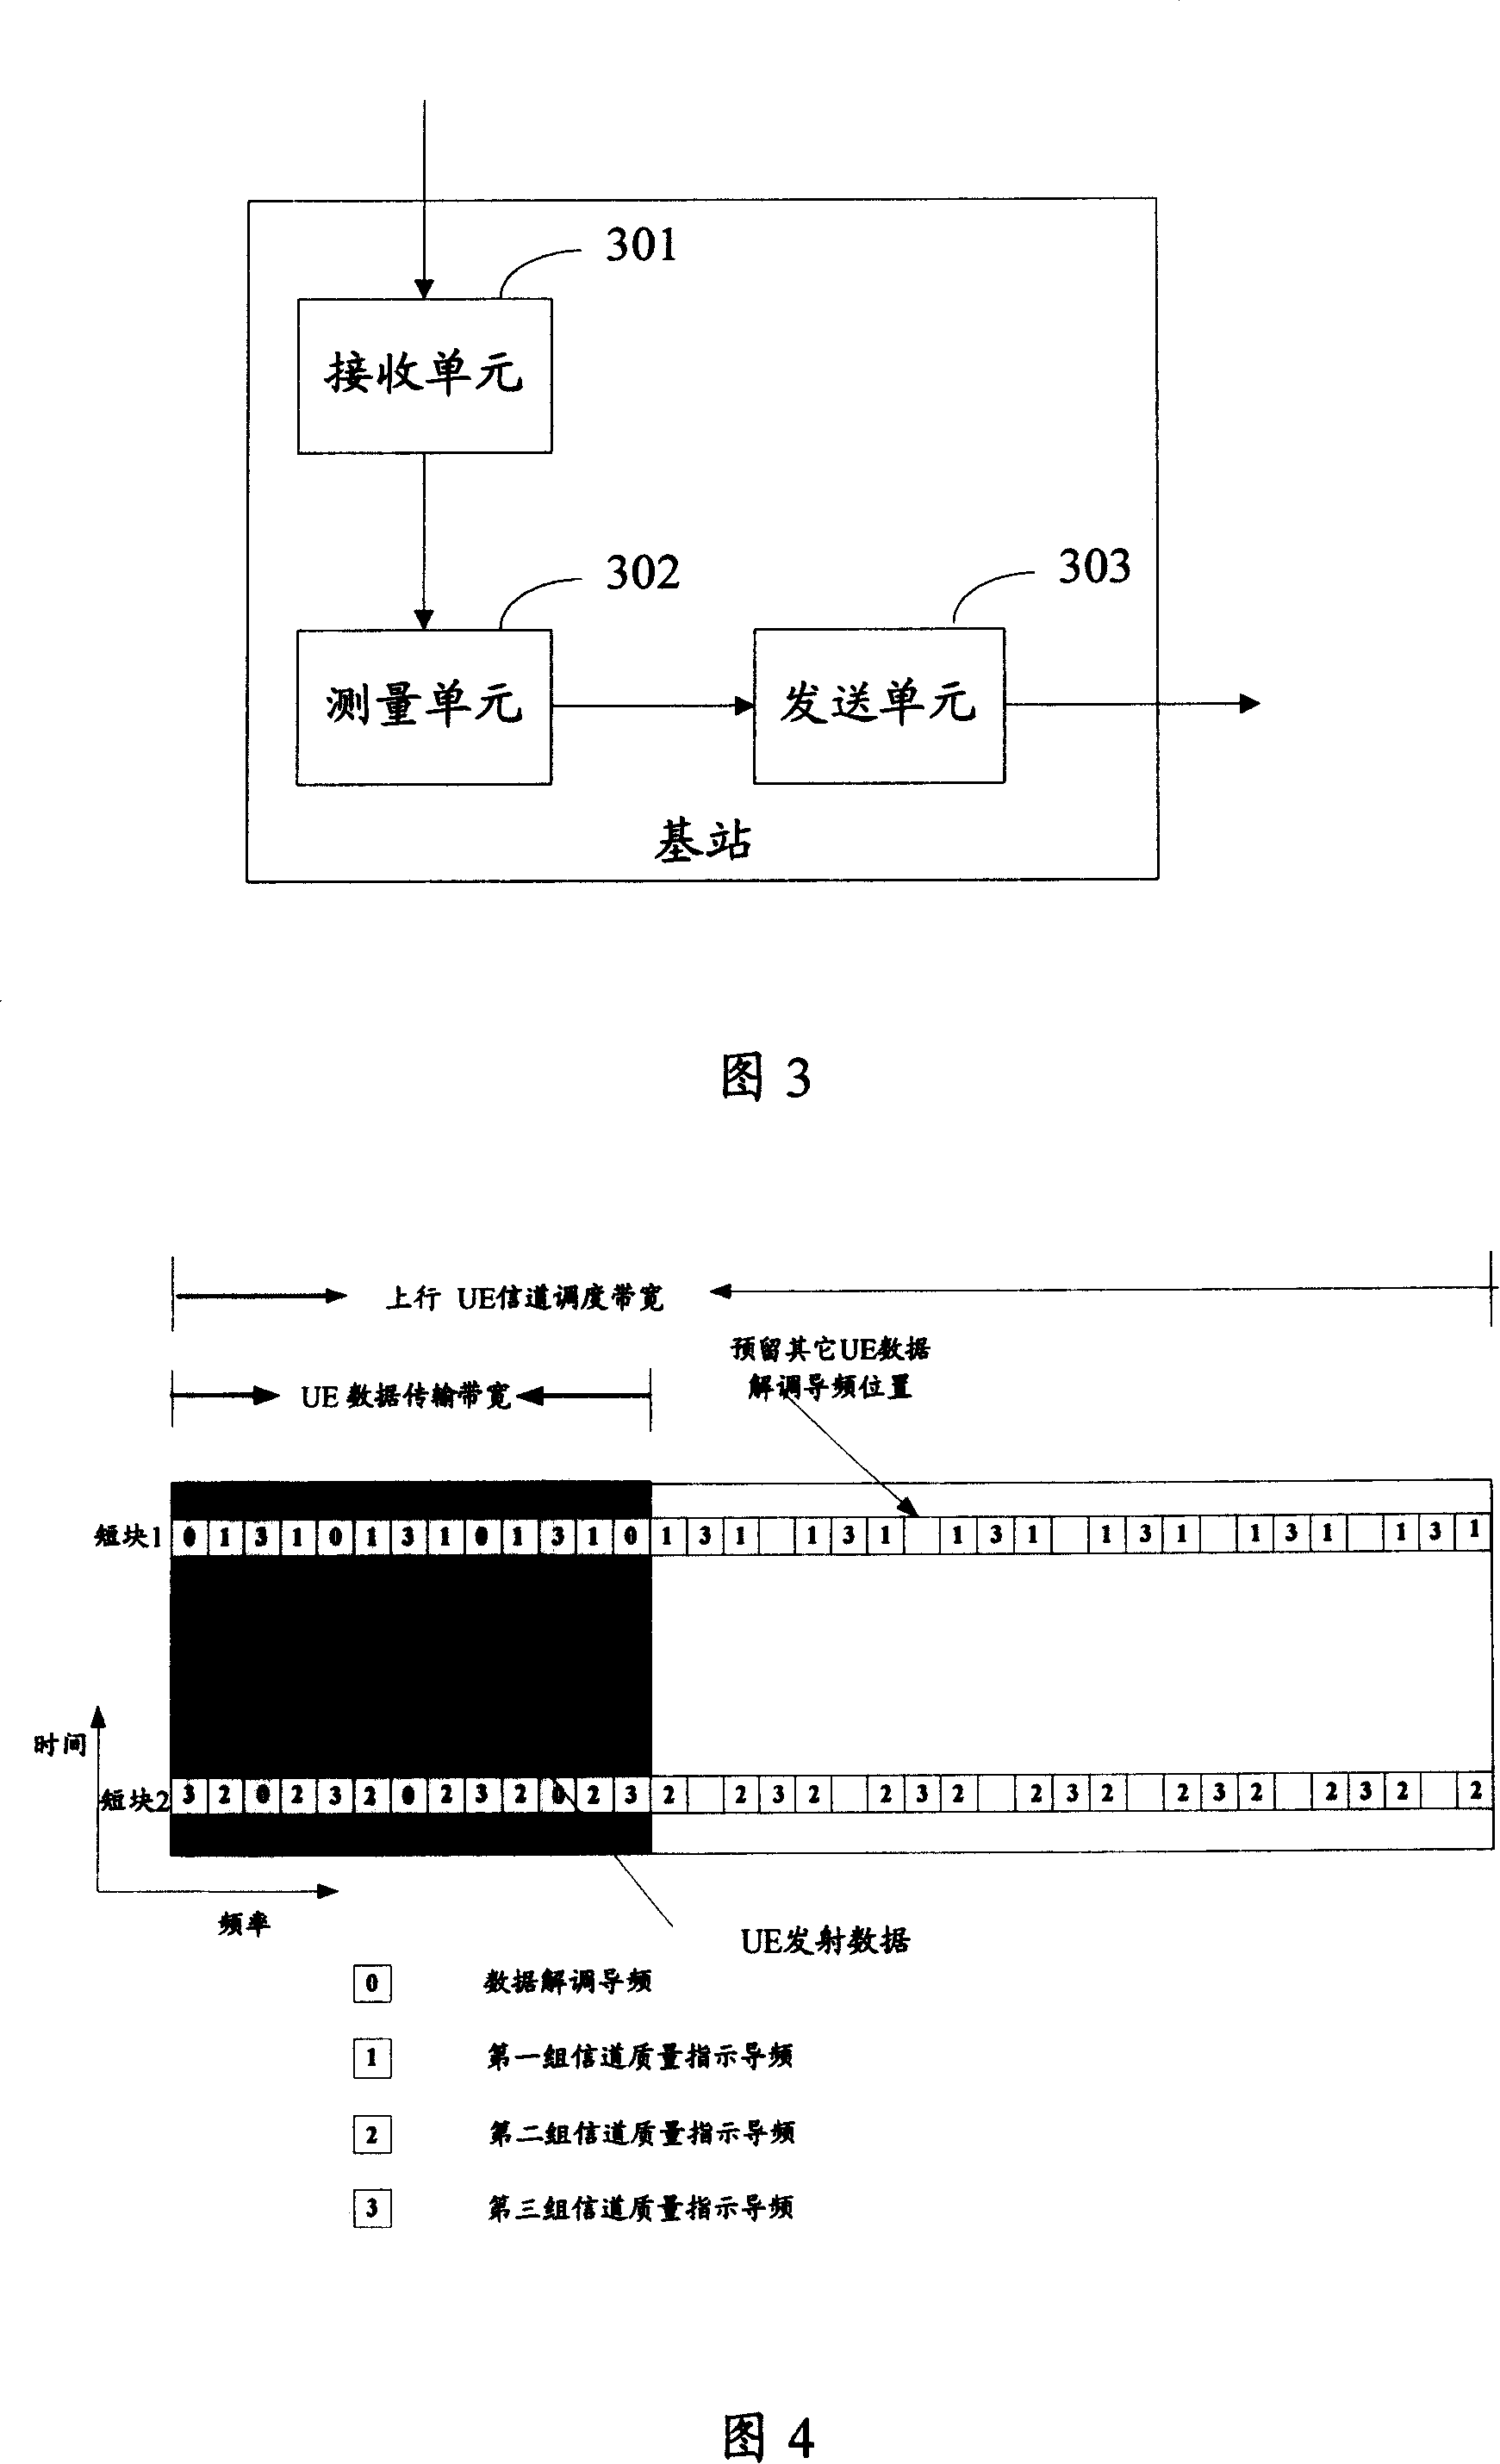 Method and system for remaining ascending synchronization